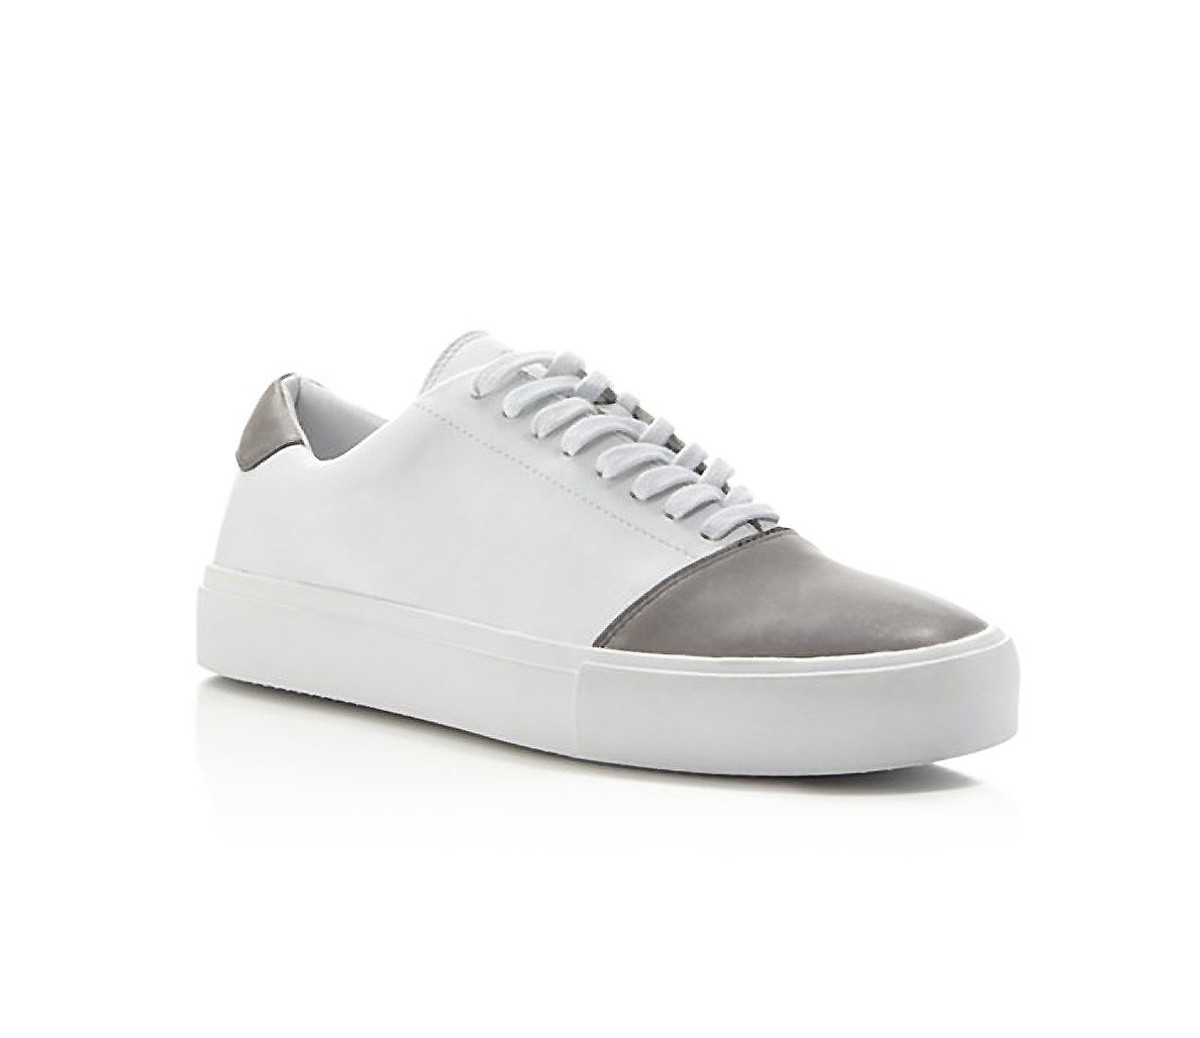 20 Leather Sneakers you Should Upgrade to Right Now - Men's Journal